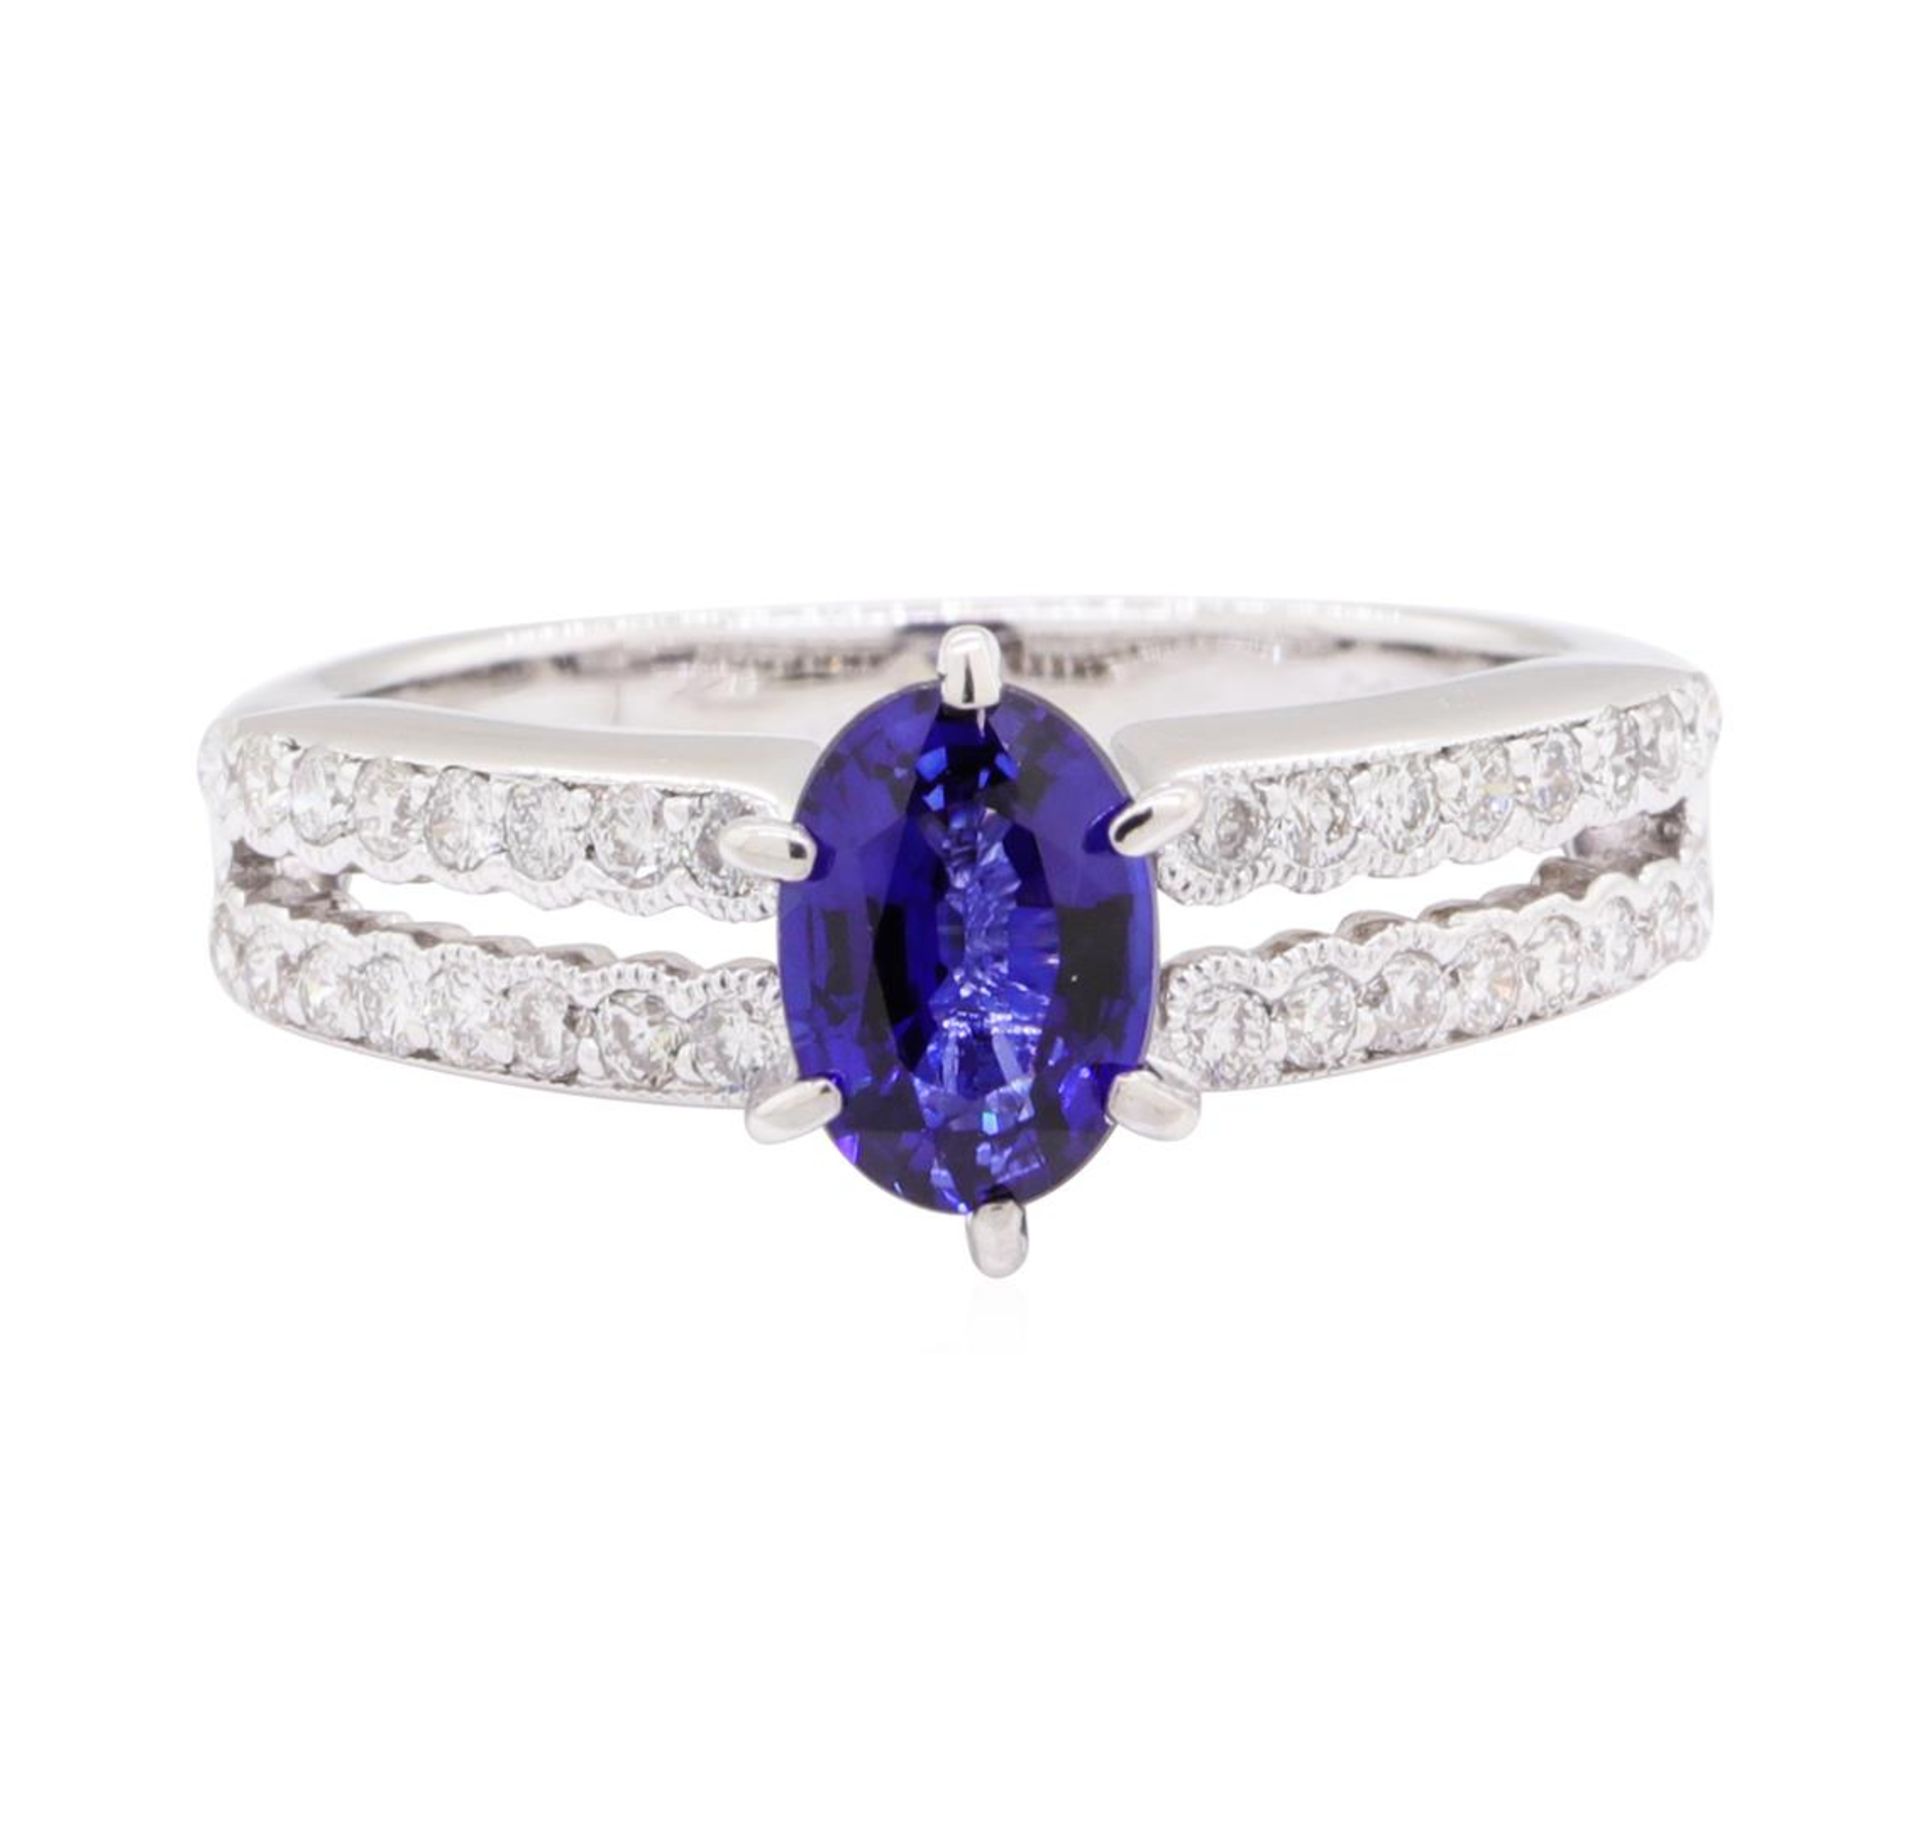 0.88ct Sapphire and Diamond Ring - 18KT White Gold - Image 2 of 4